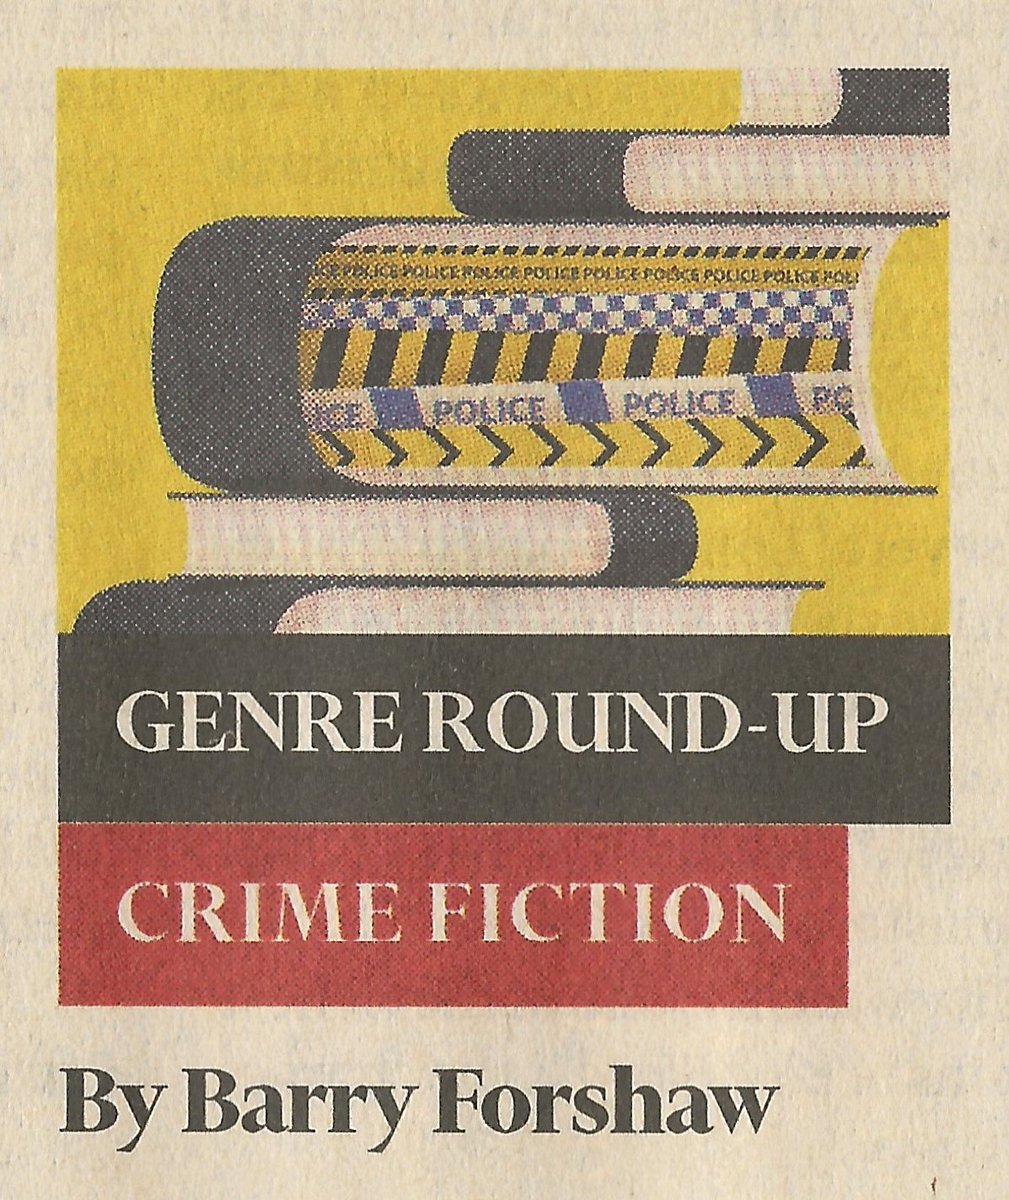 Covering in the FT: Holly/Stephen King, The Silent Man/David Fennell, Tell Me Your Secrets/Mel McGrath, The Devil Stone/Caro Ramsay, Mirror Image/ Gunnar Staalesen, Stop Them Dead/Peter James, Word Monkey/Chris Fowler, Gary Disher/Penguin Modern Classics crimetime.co.uk/new-crime-in-t…